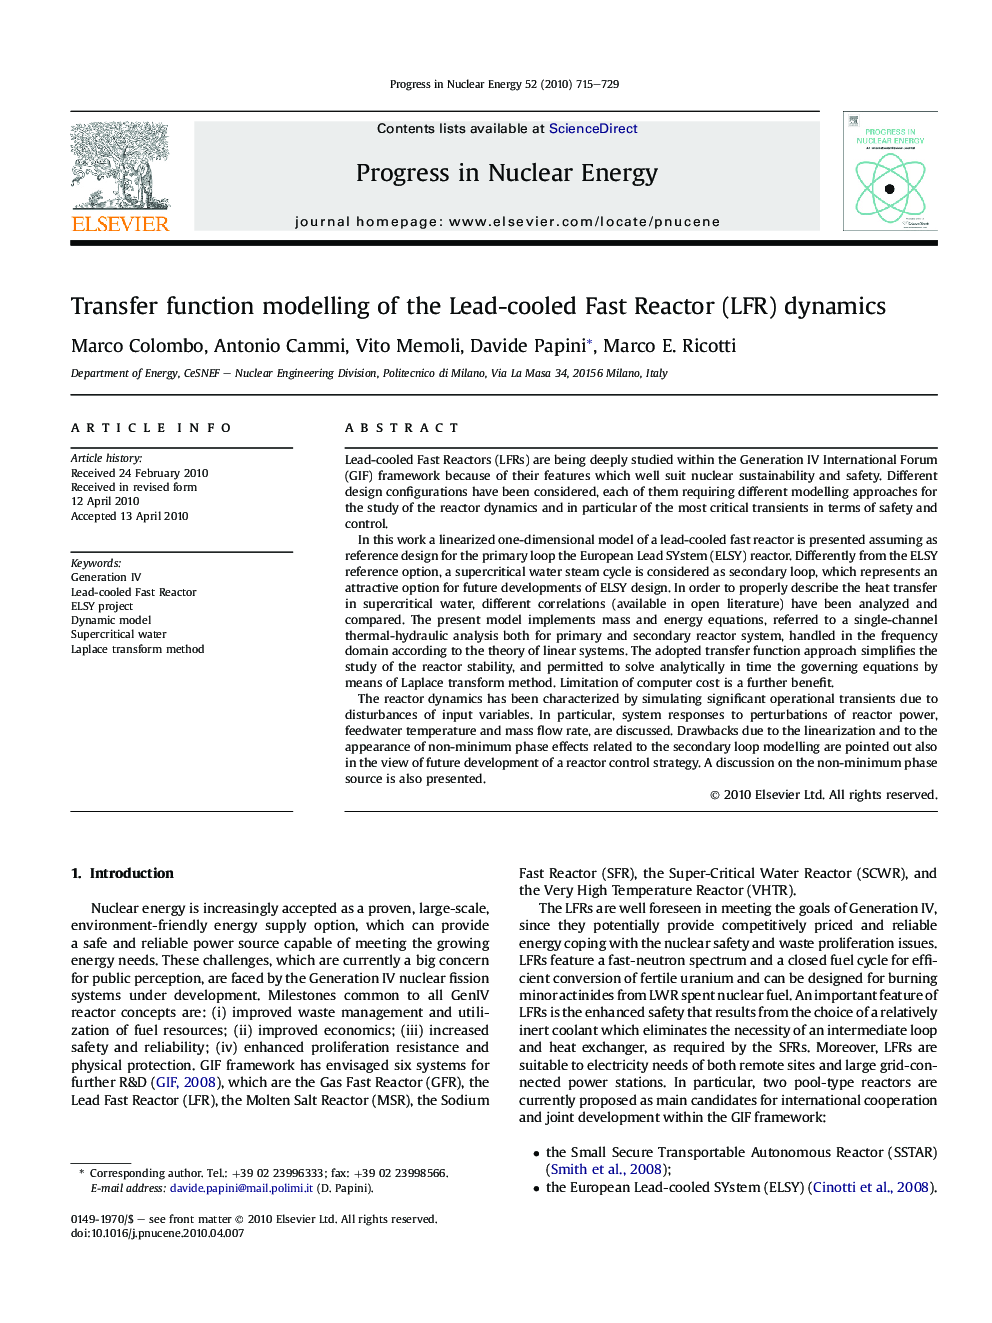 Transfer function modelling of the Lead-cooled Fast Reactor (LFR) dynamics